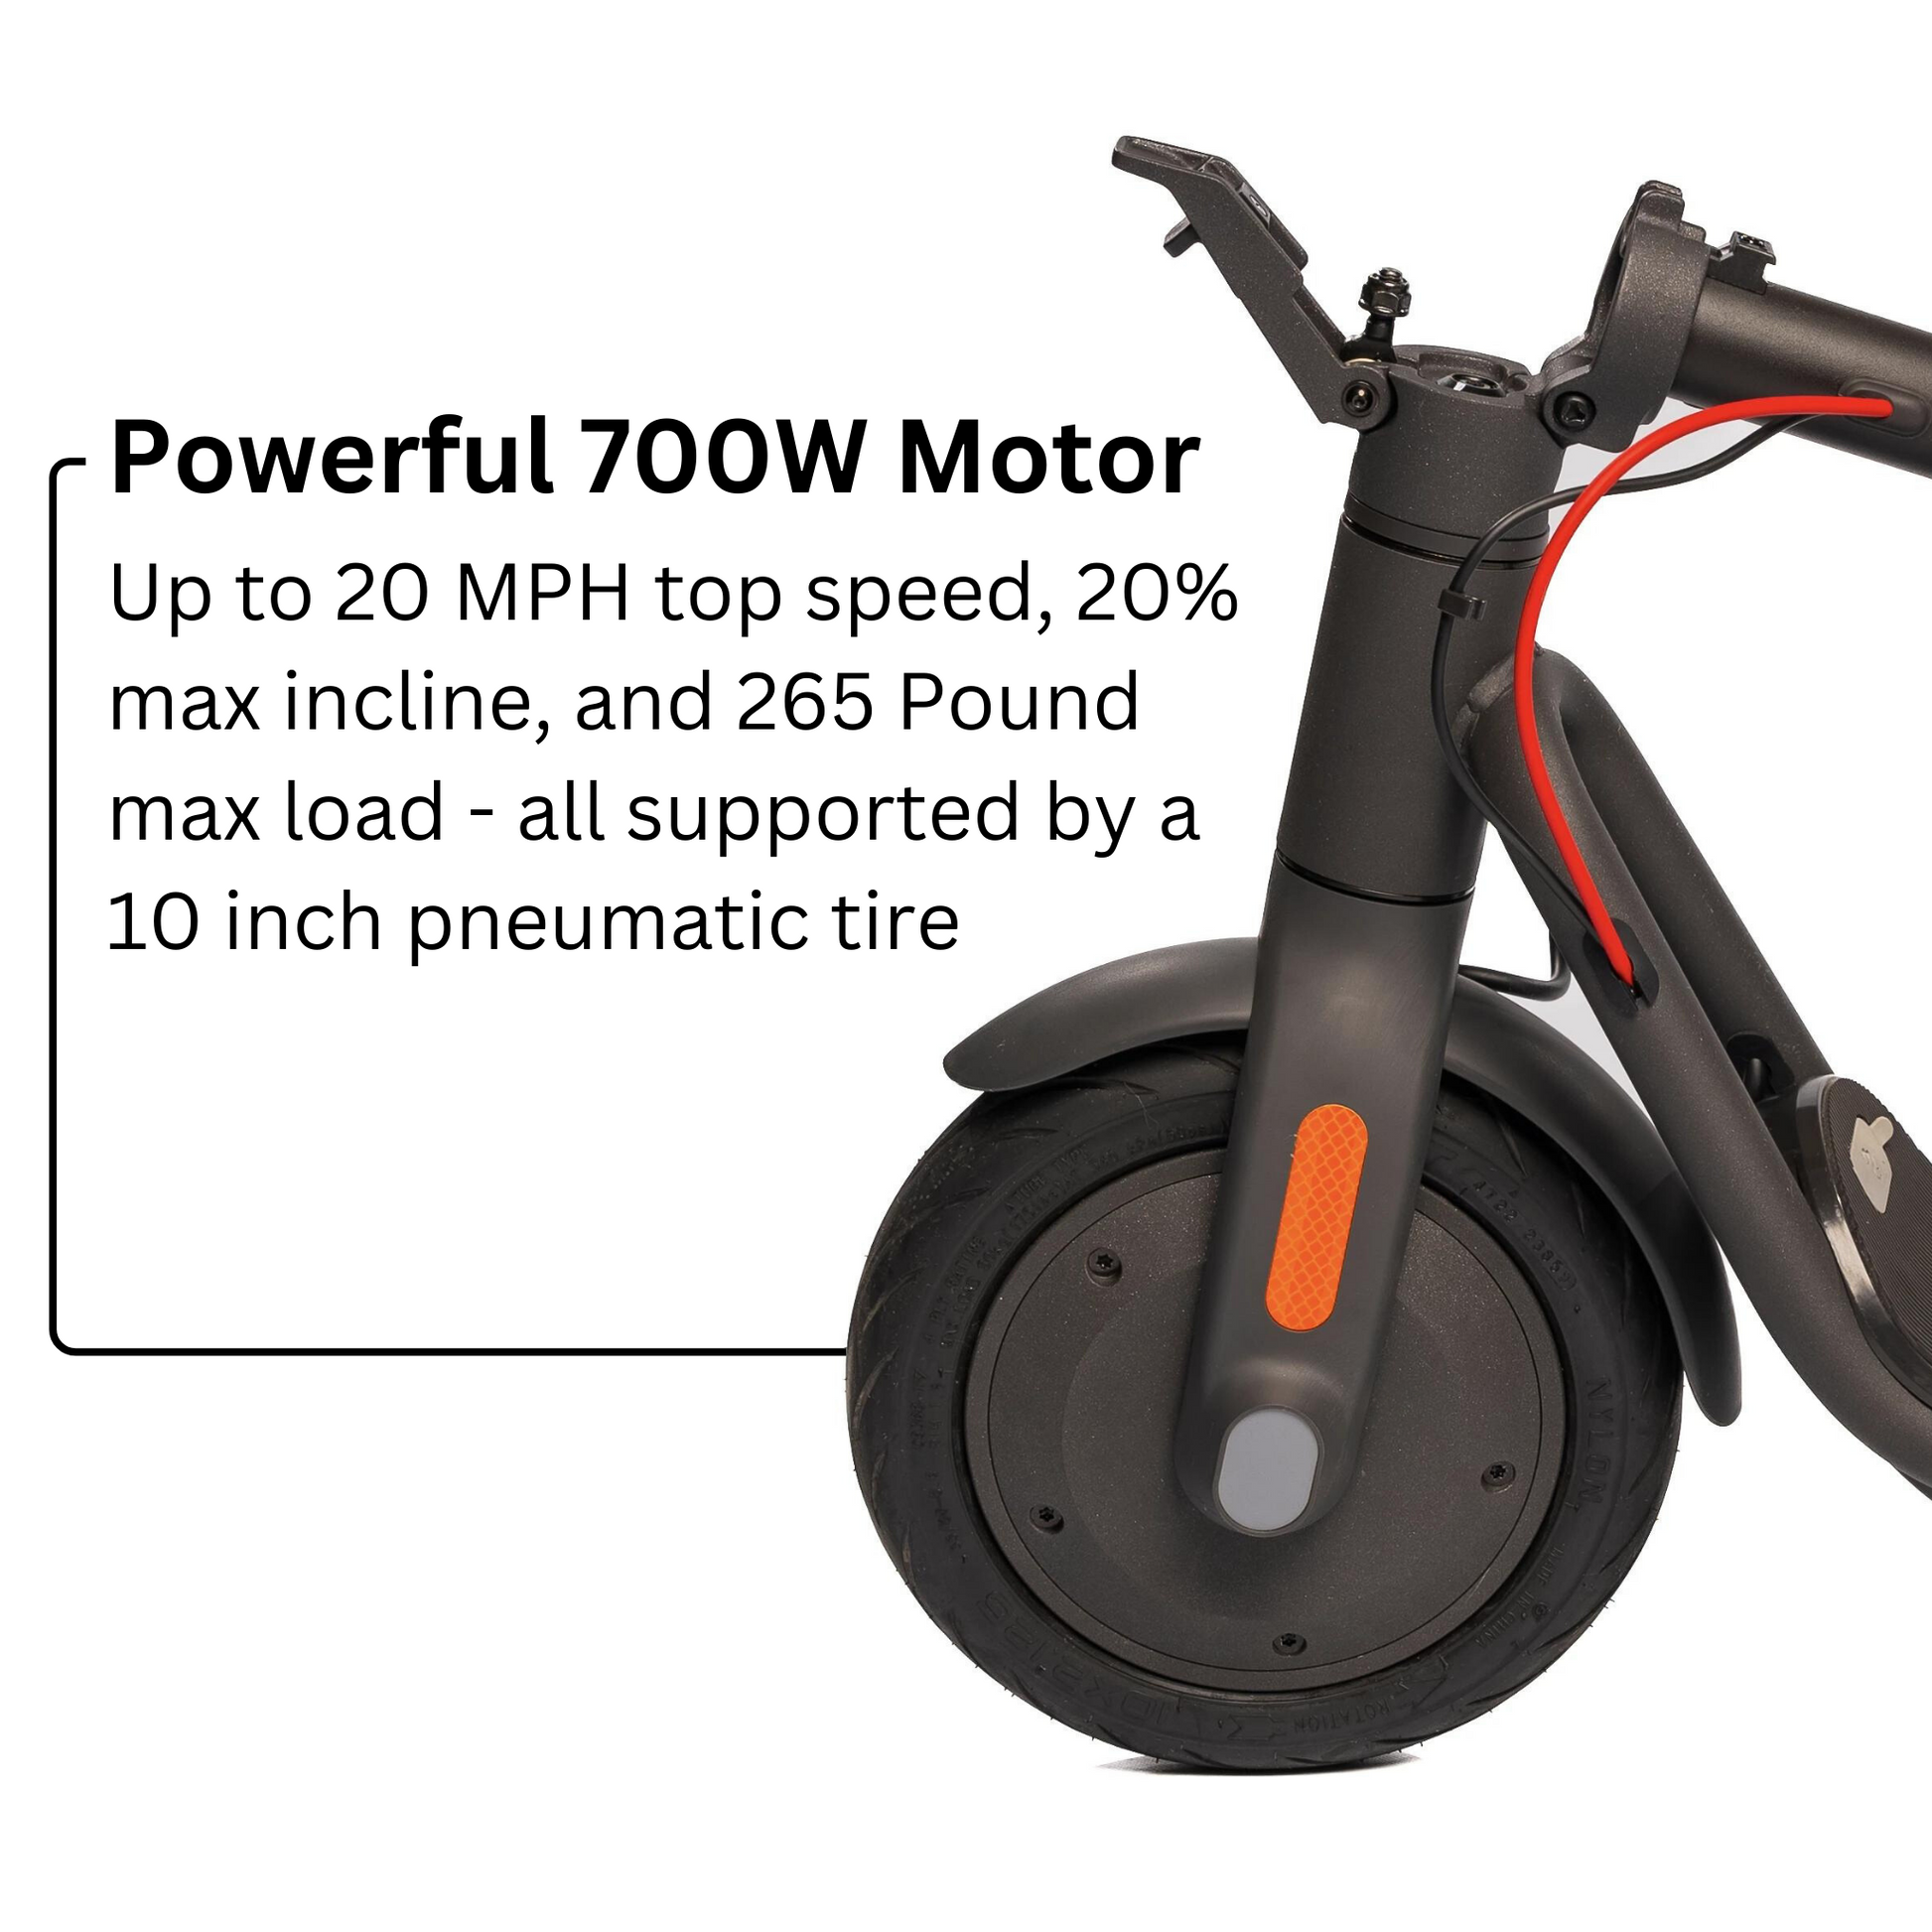 NAVEE V50 Electric Scooter - Black 